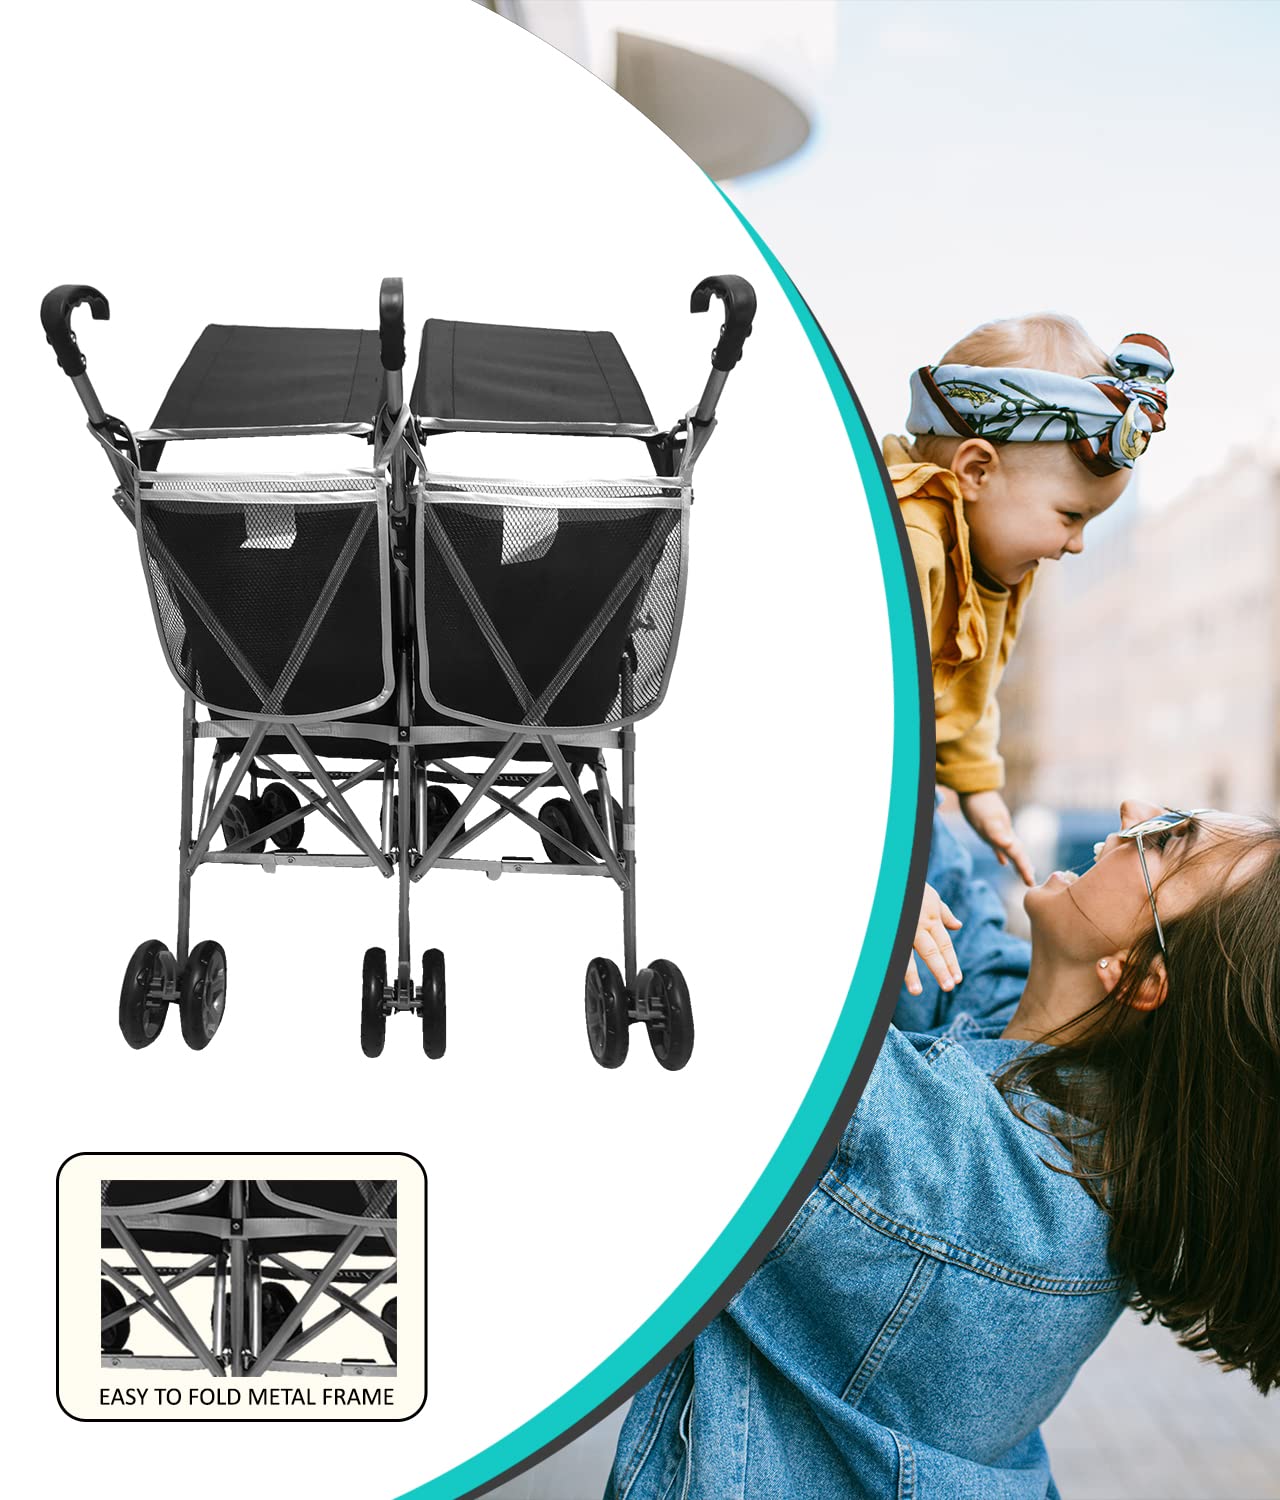 AmorosO Twin Lightweight Umbrella Stroller - Easy to Clean Stroller - Baby Stroller with Four Wheels - Travel-Ready Stroller - with Extra Storage - Sunlight and Light Rain Protection - Black